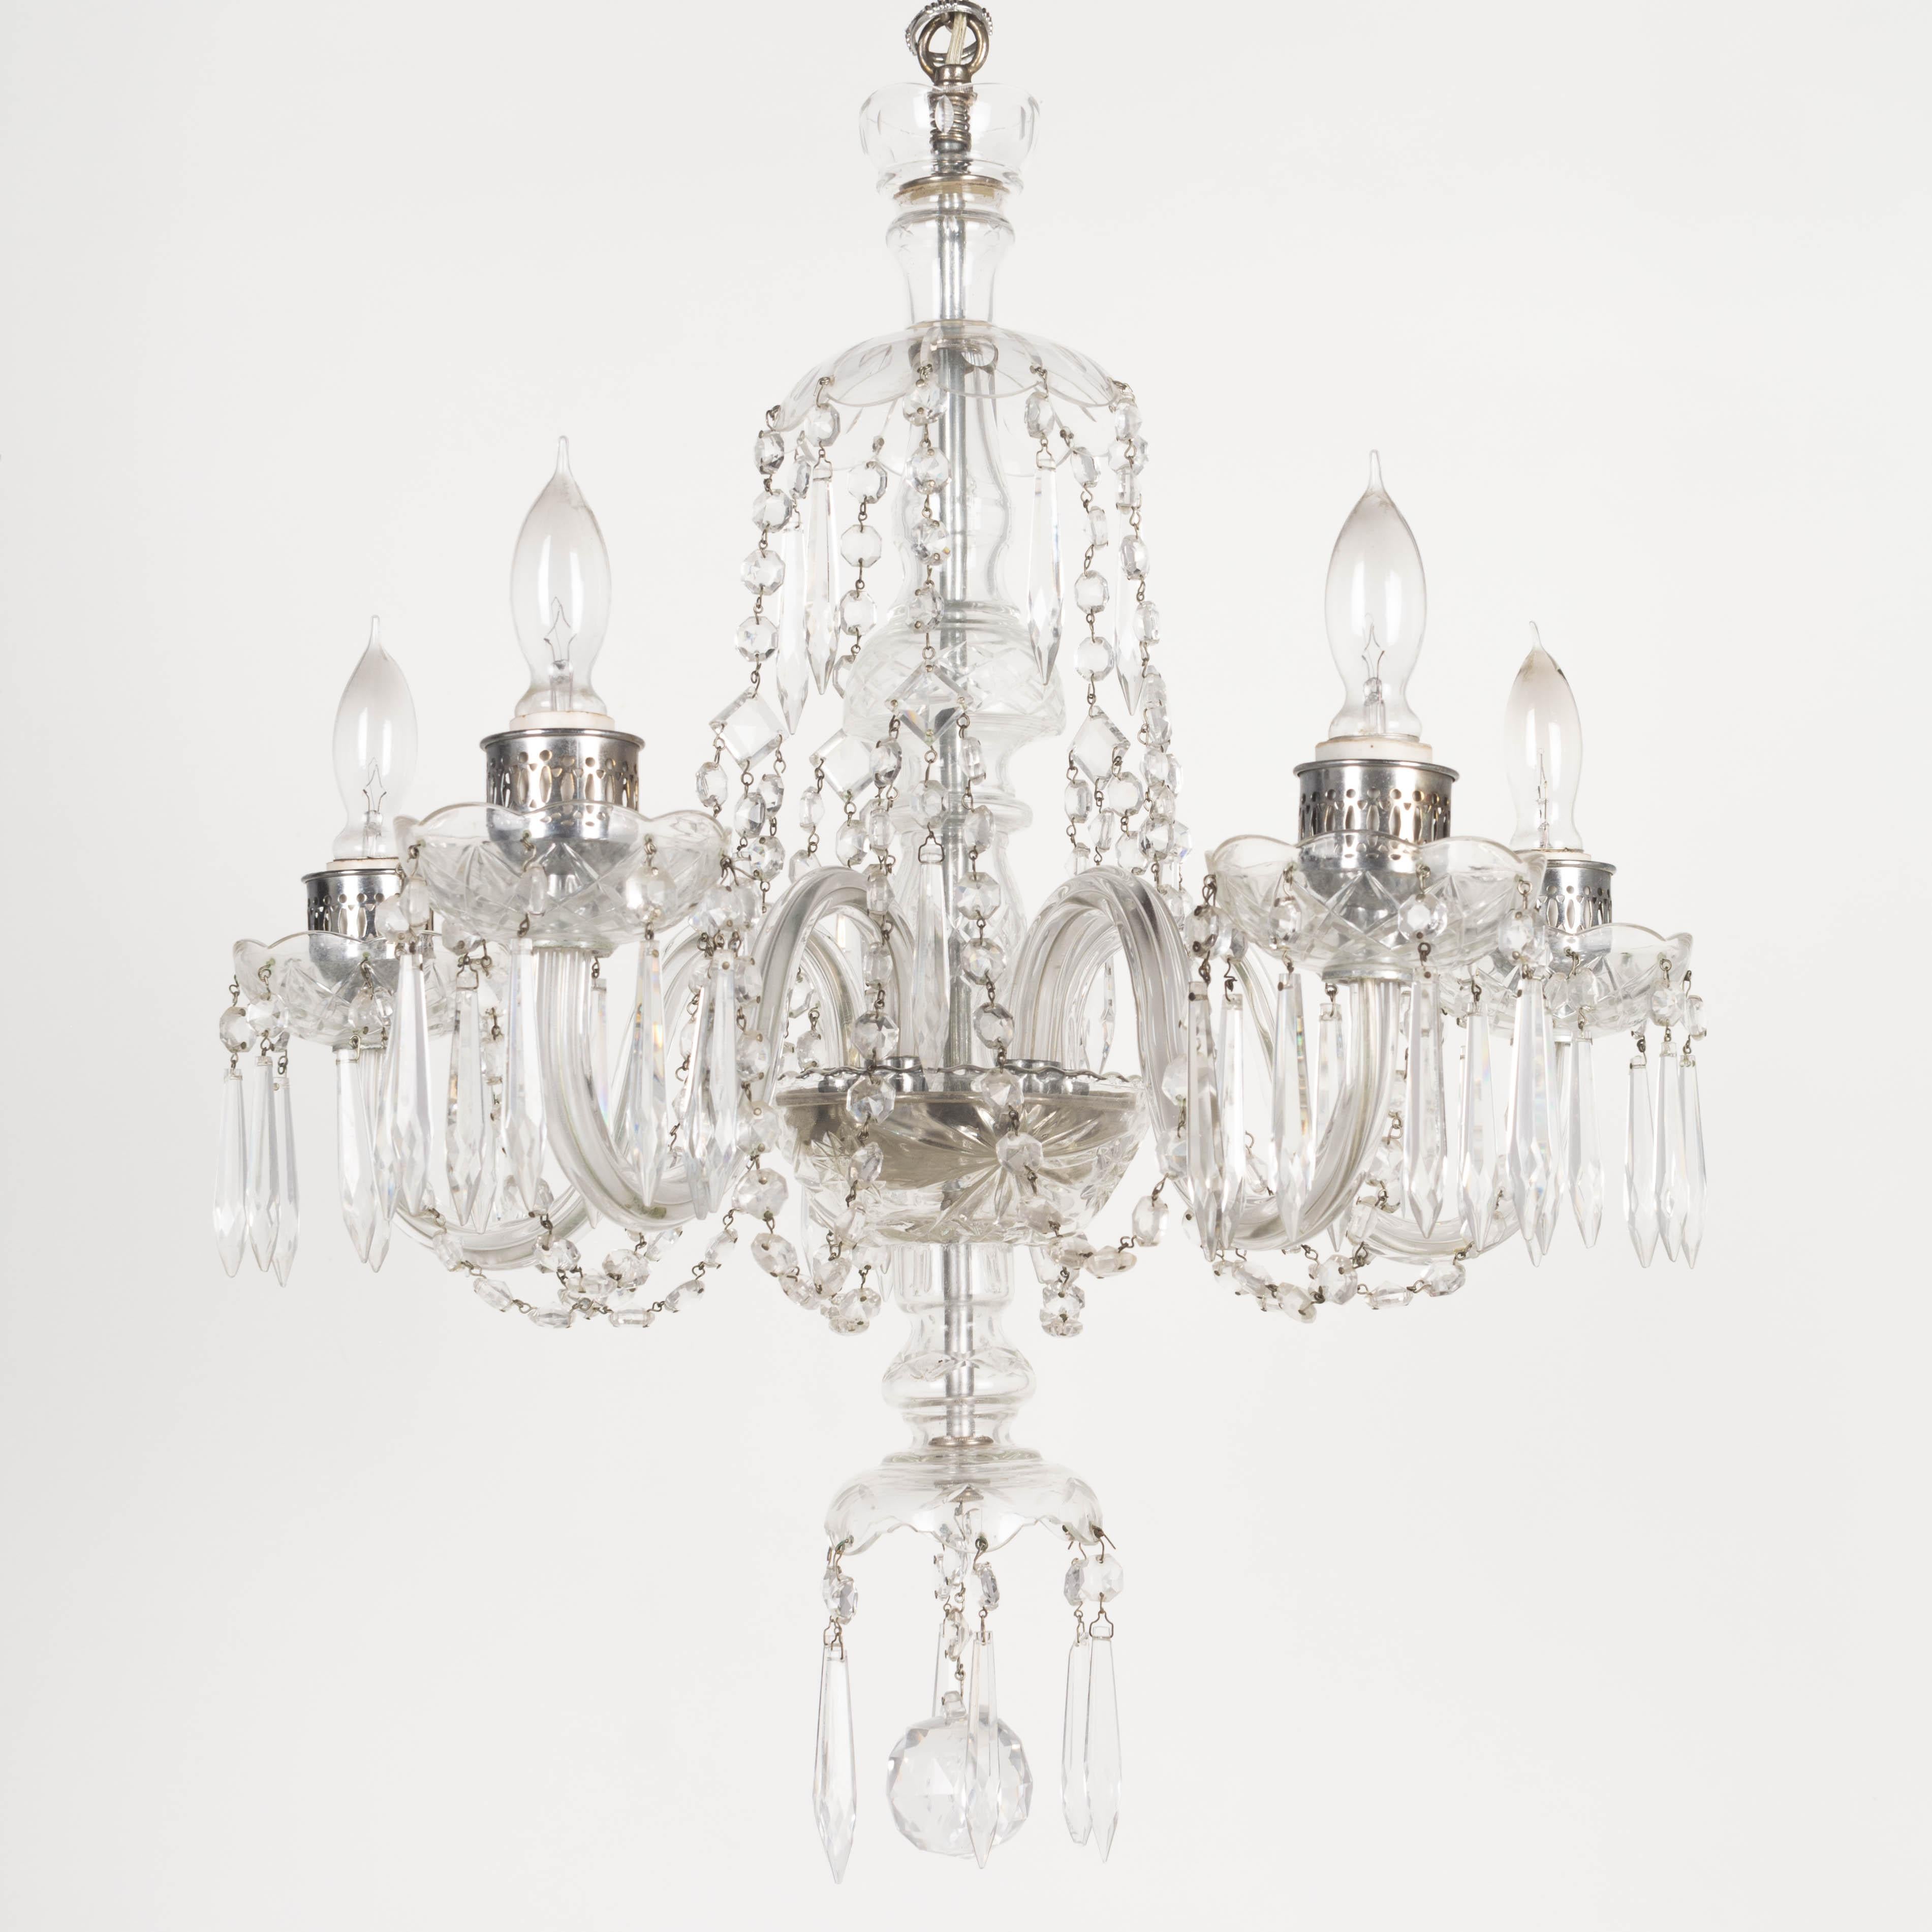 A vintage French five-light crystal chandelier with glass arms, cut glass bobeches and center column, hanging crystal prisms and faceted bead chain. In working condition. Circa 1970-1990. 24